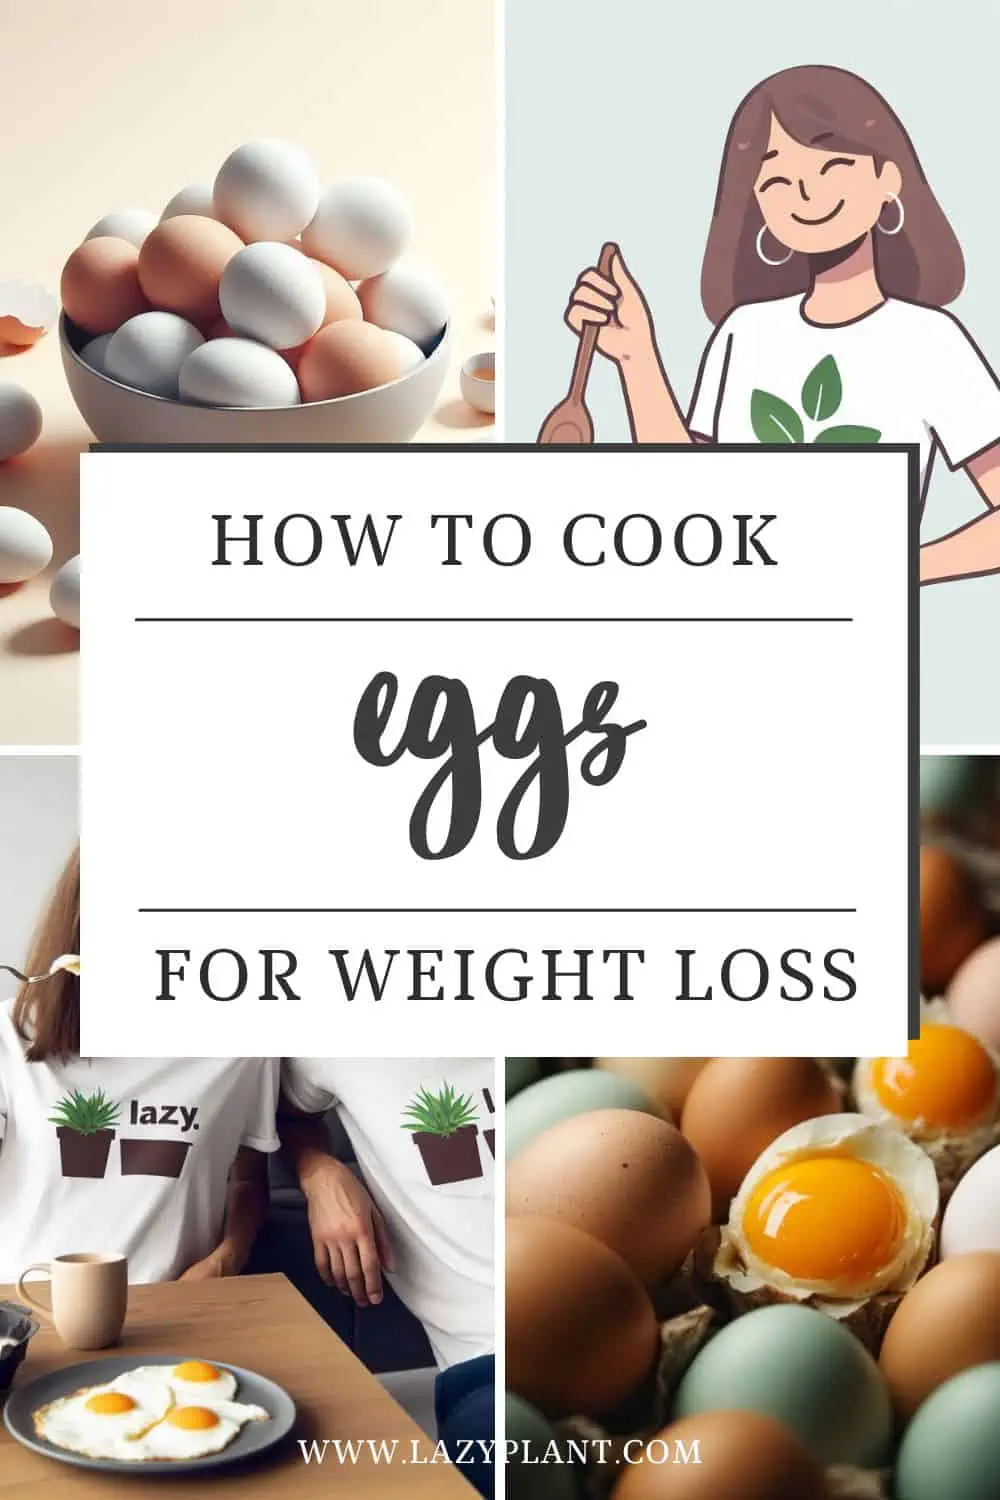 How to Cook Eggs to get the fewest Calories? | Diet tips